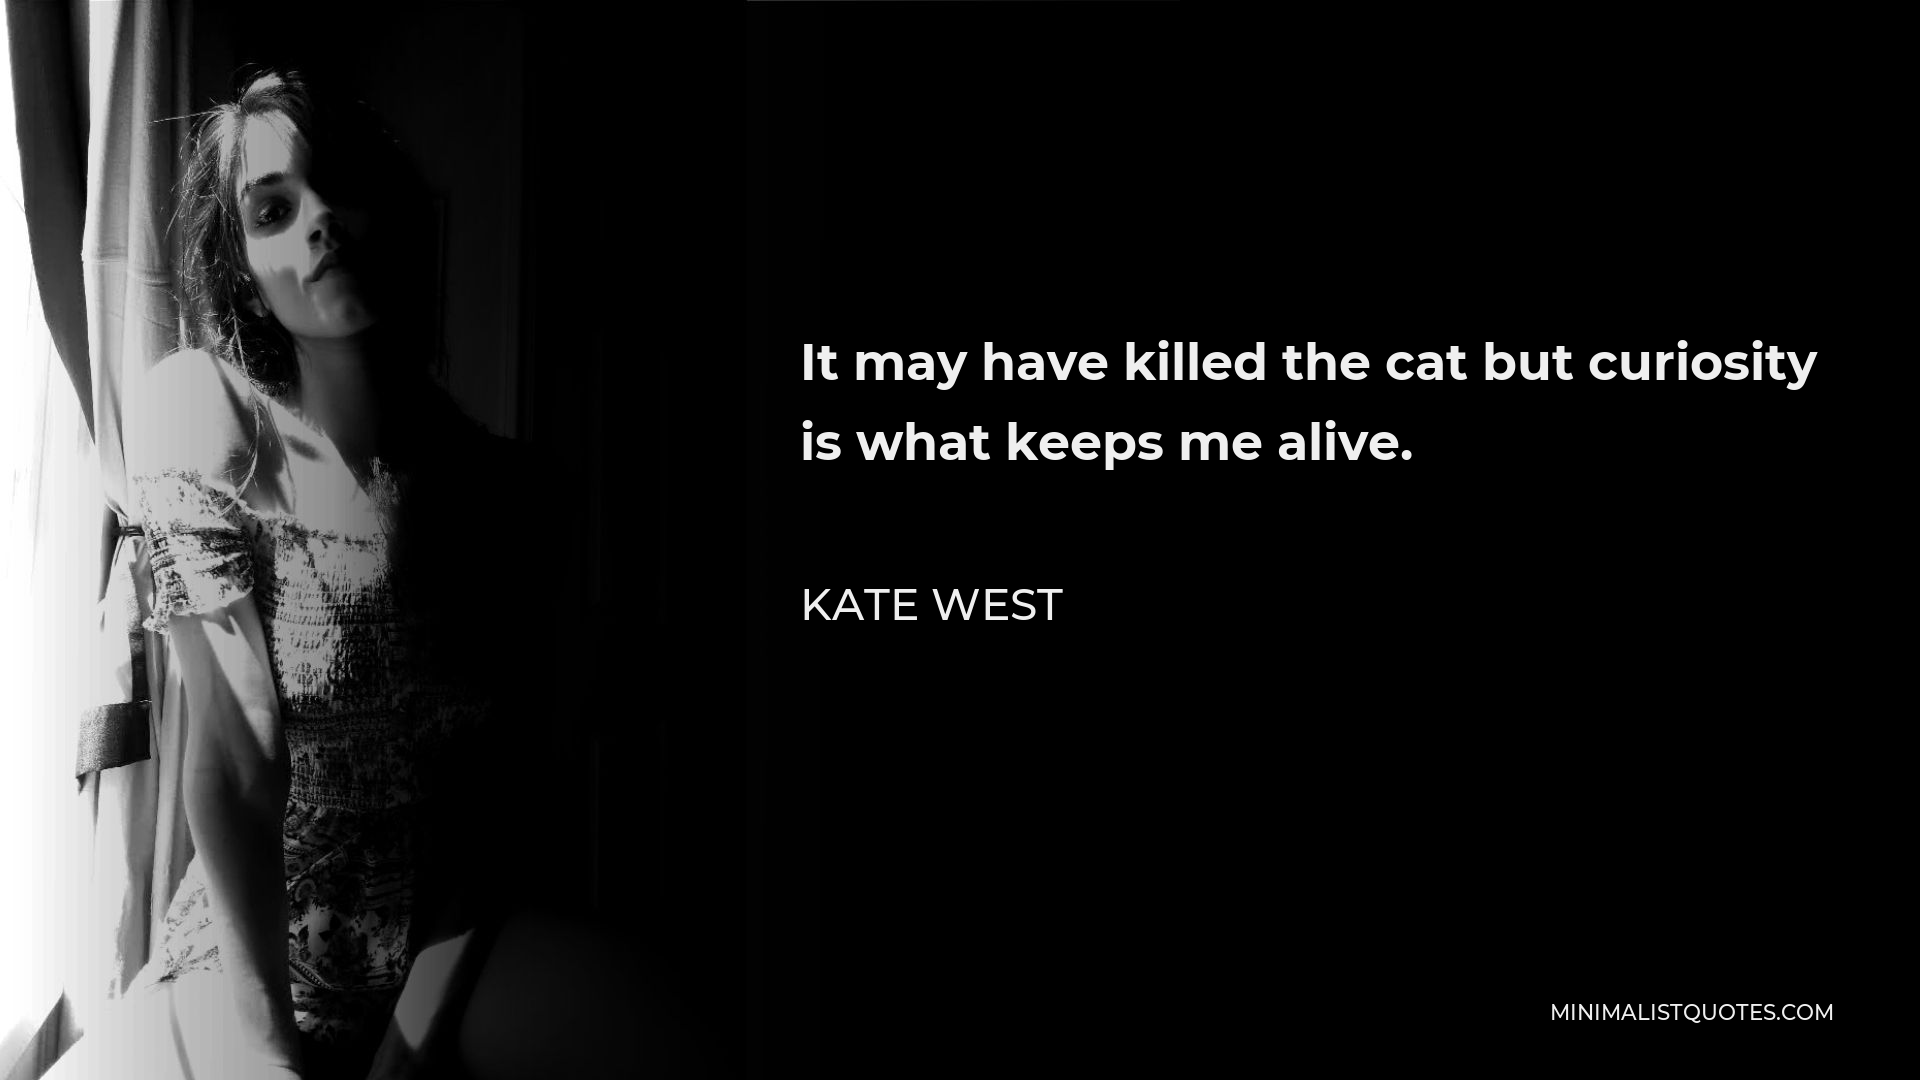 Kate West Quote - It may have killed the cat but curiosity is what keeps me alive.